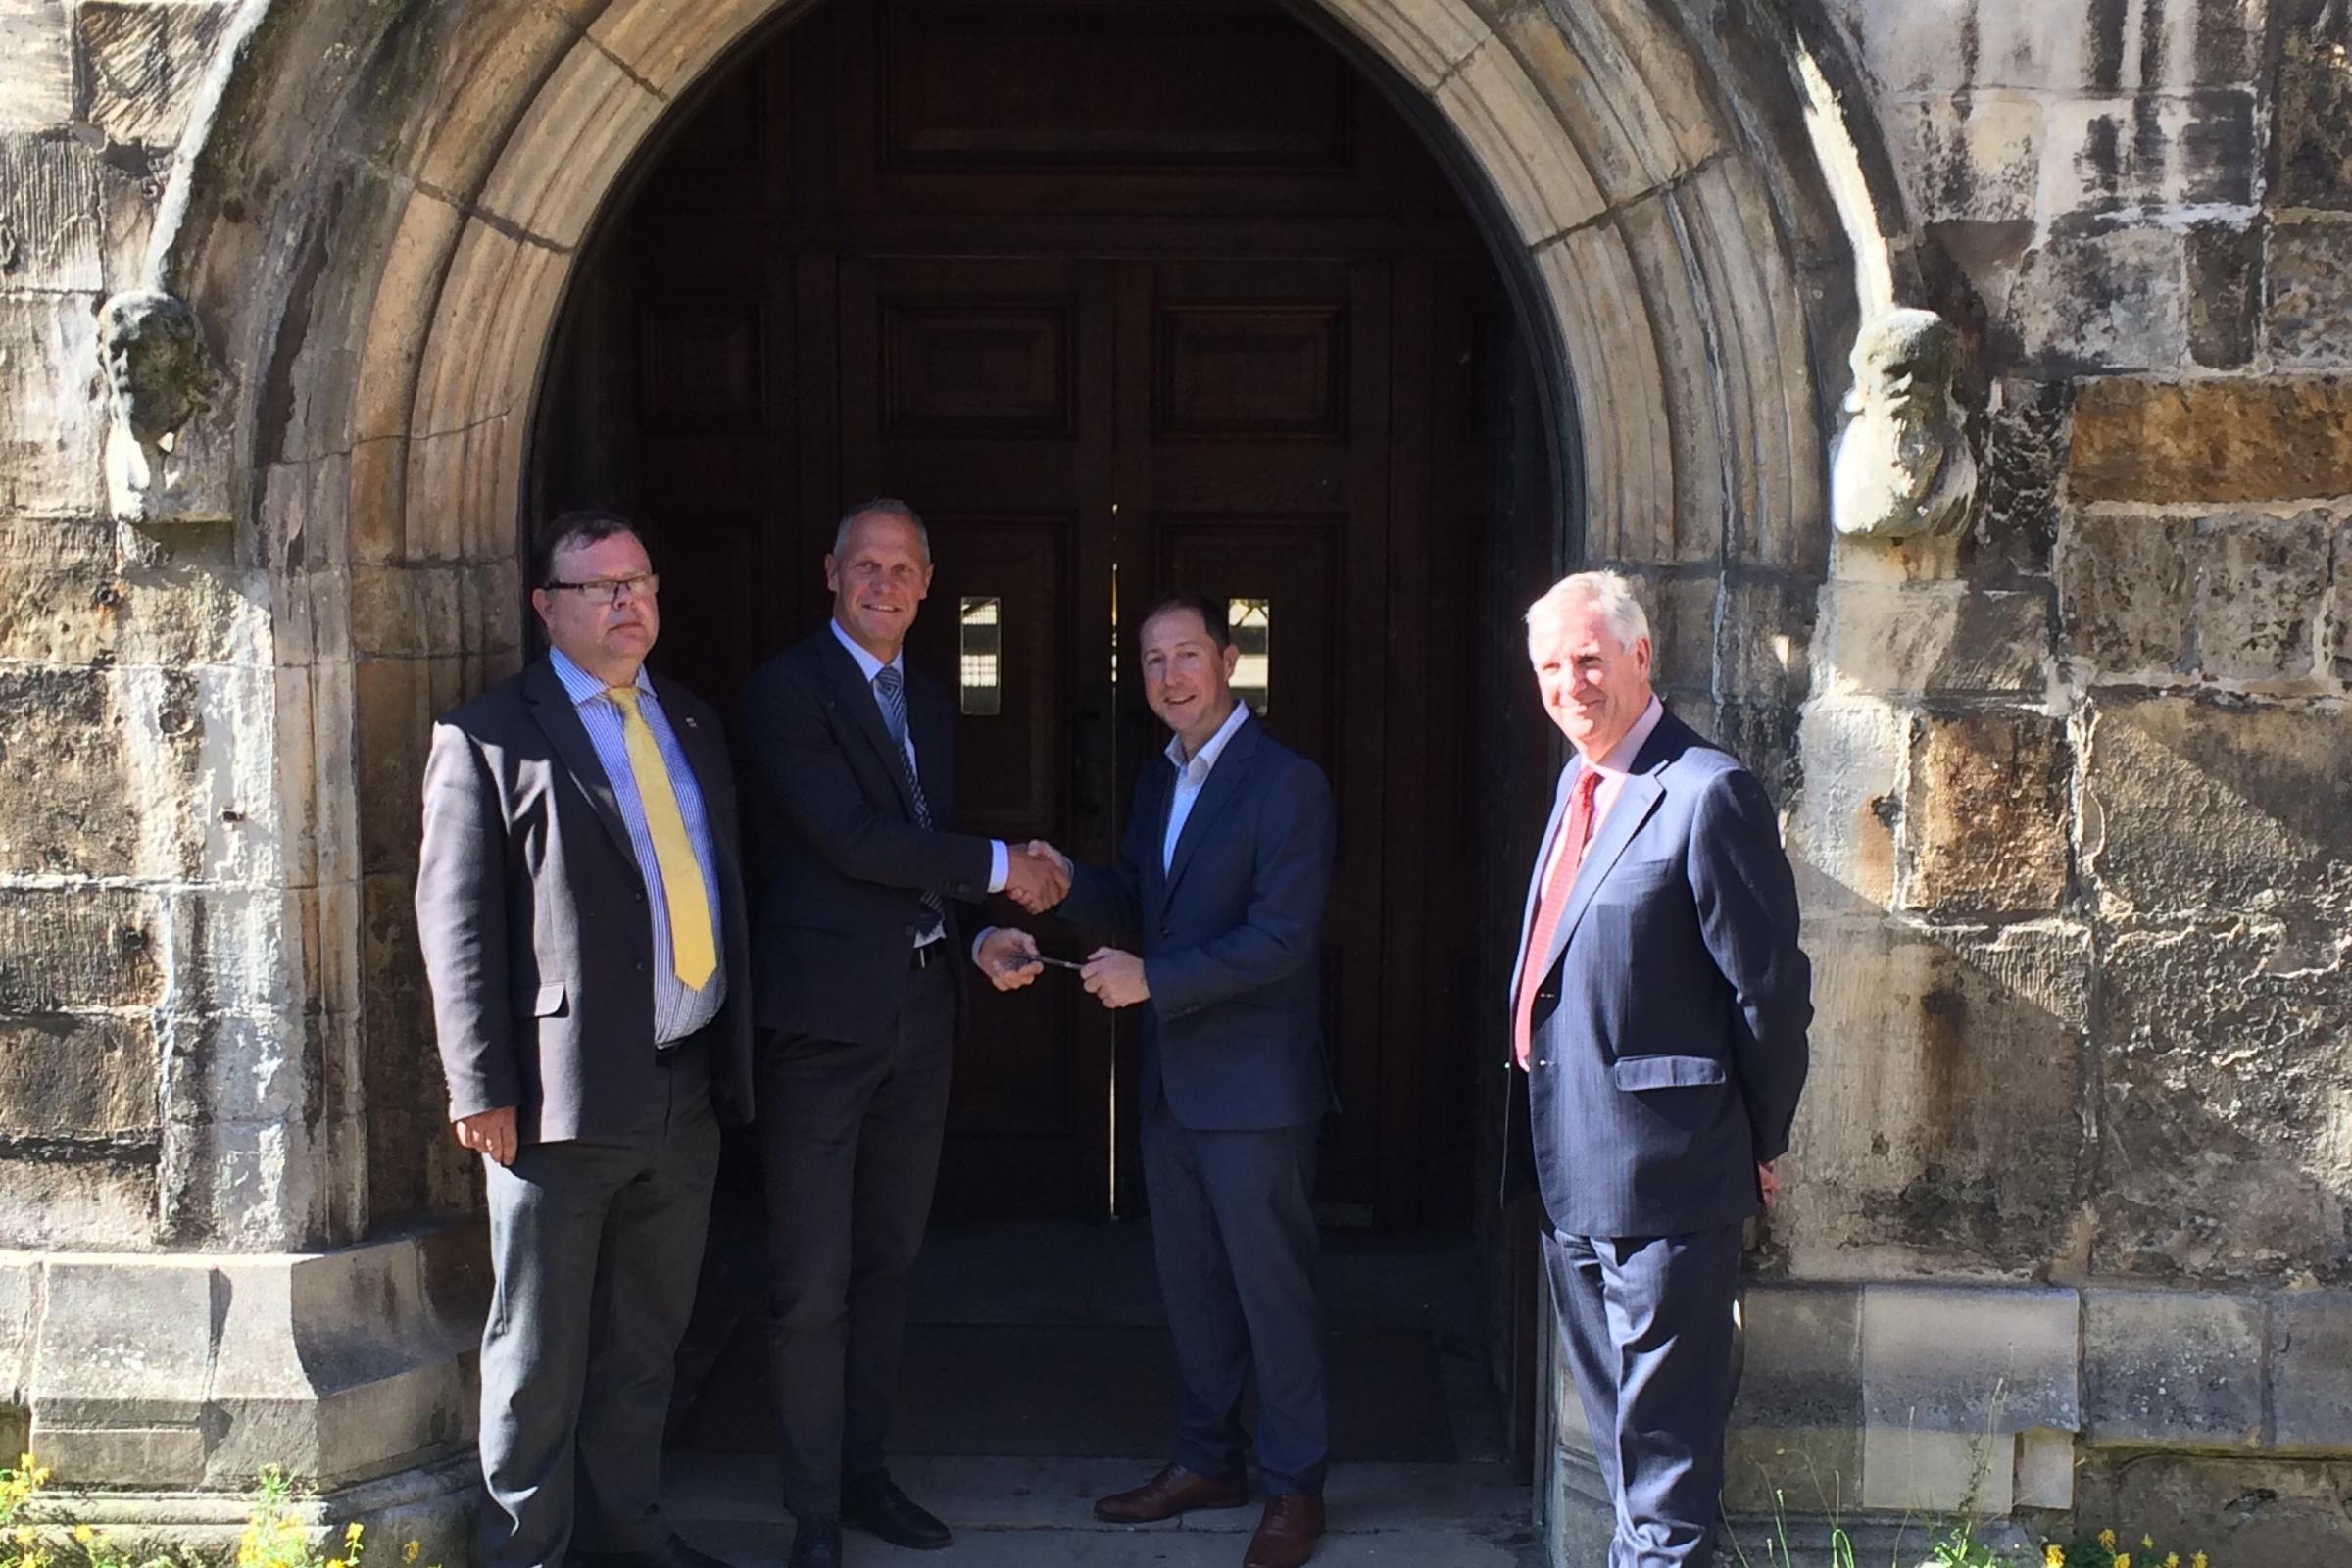 Work begins on £20million renovation at York's Guildhall site